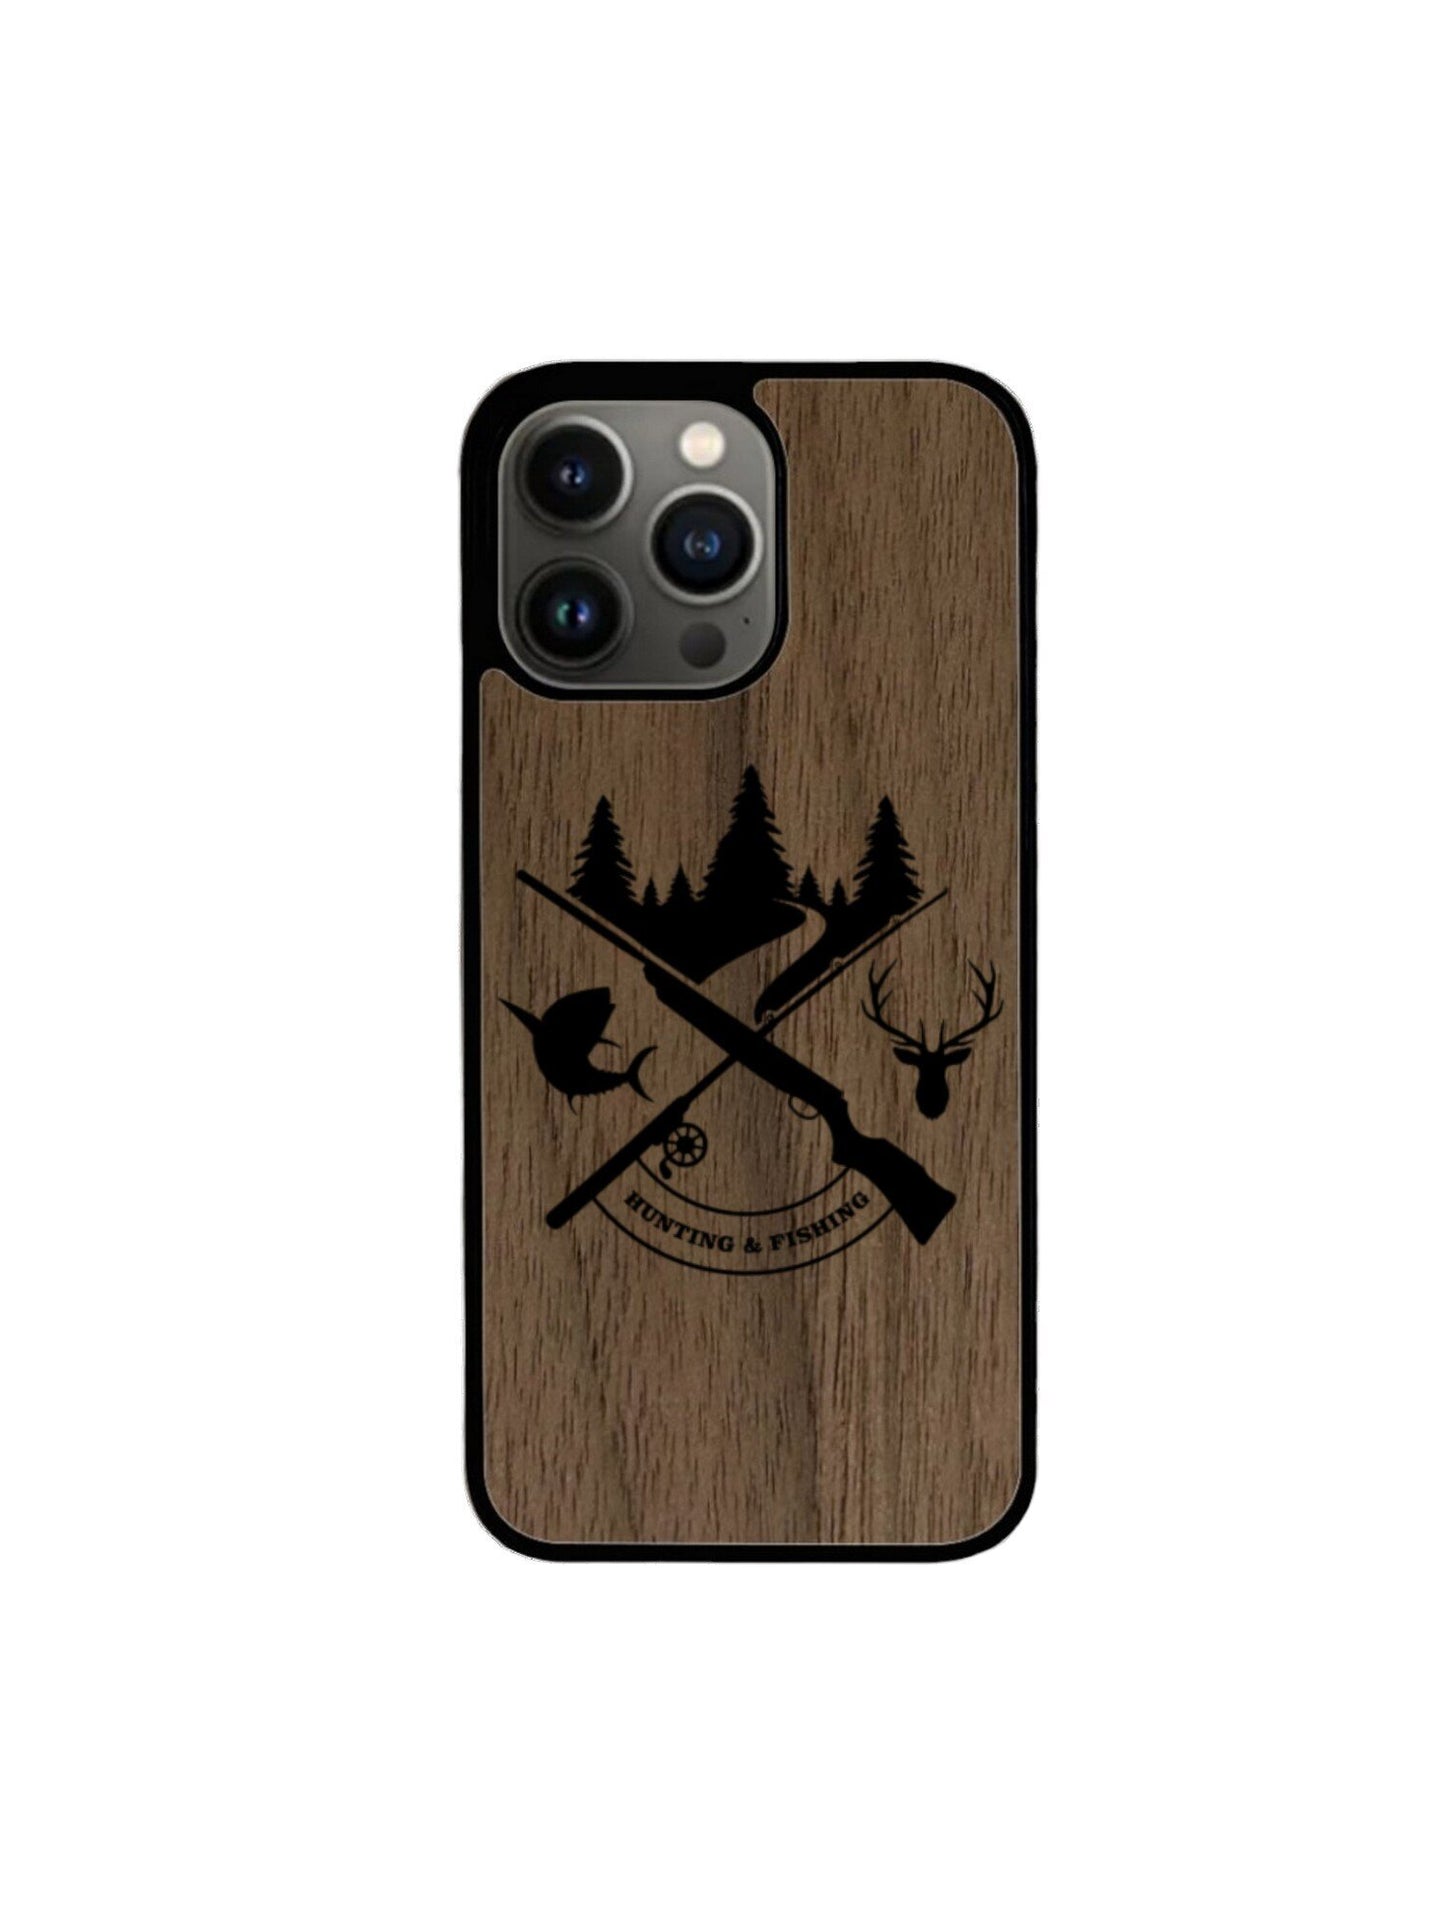 Coque Iphone - Chasse et pêche